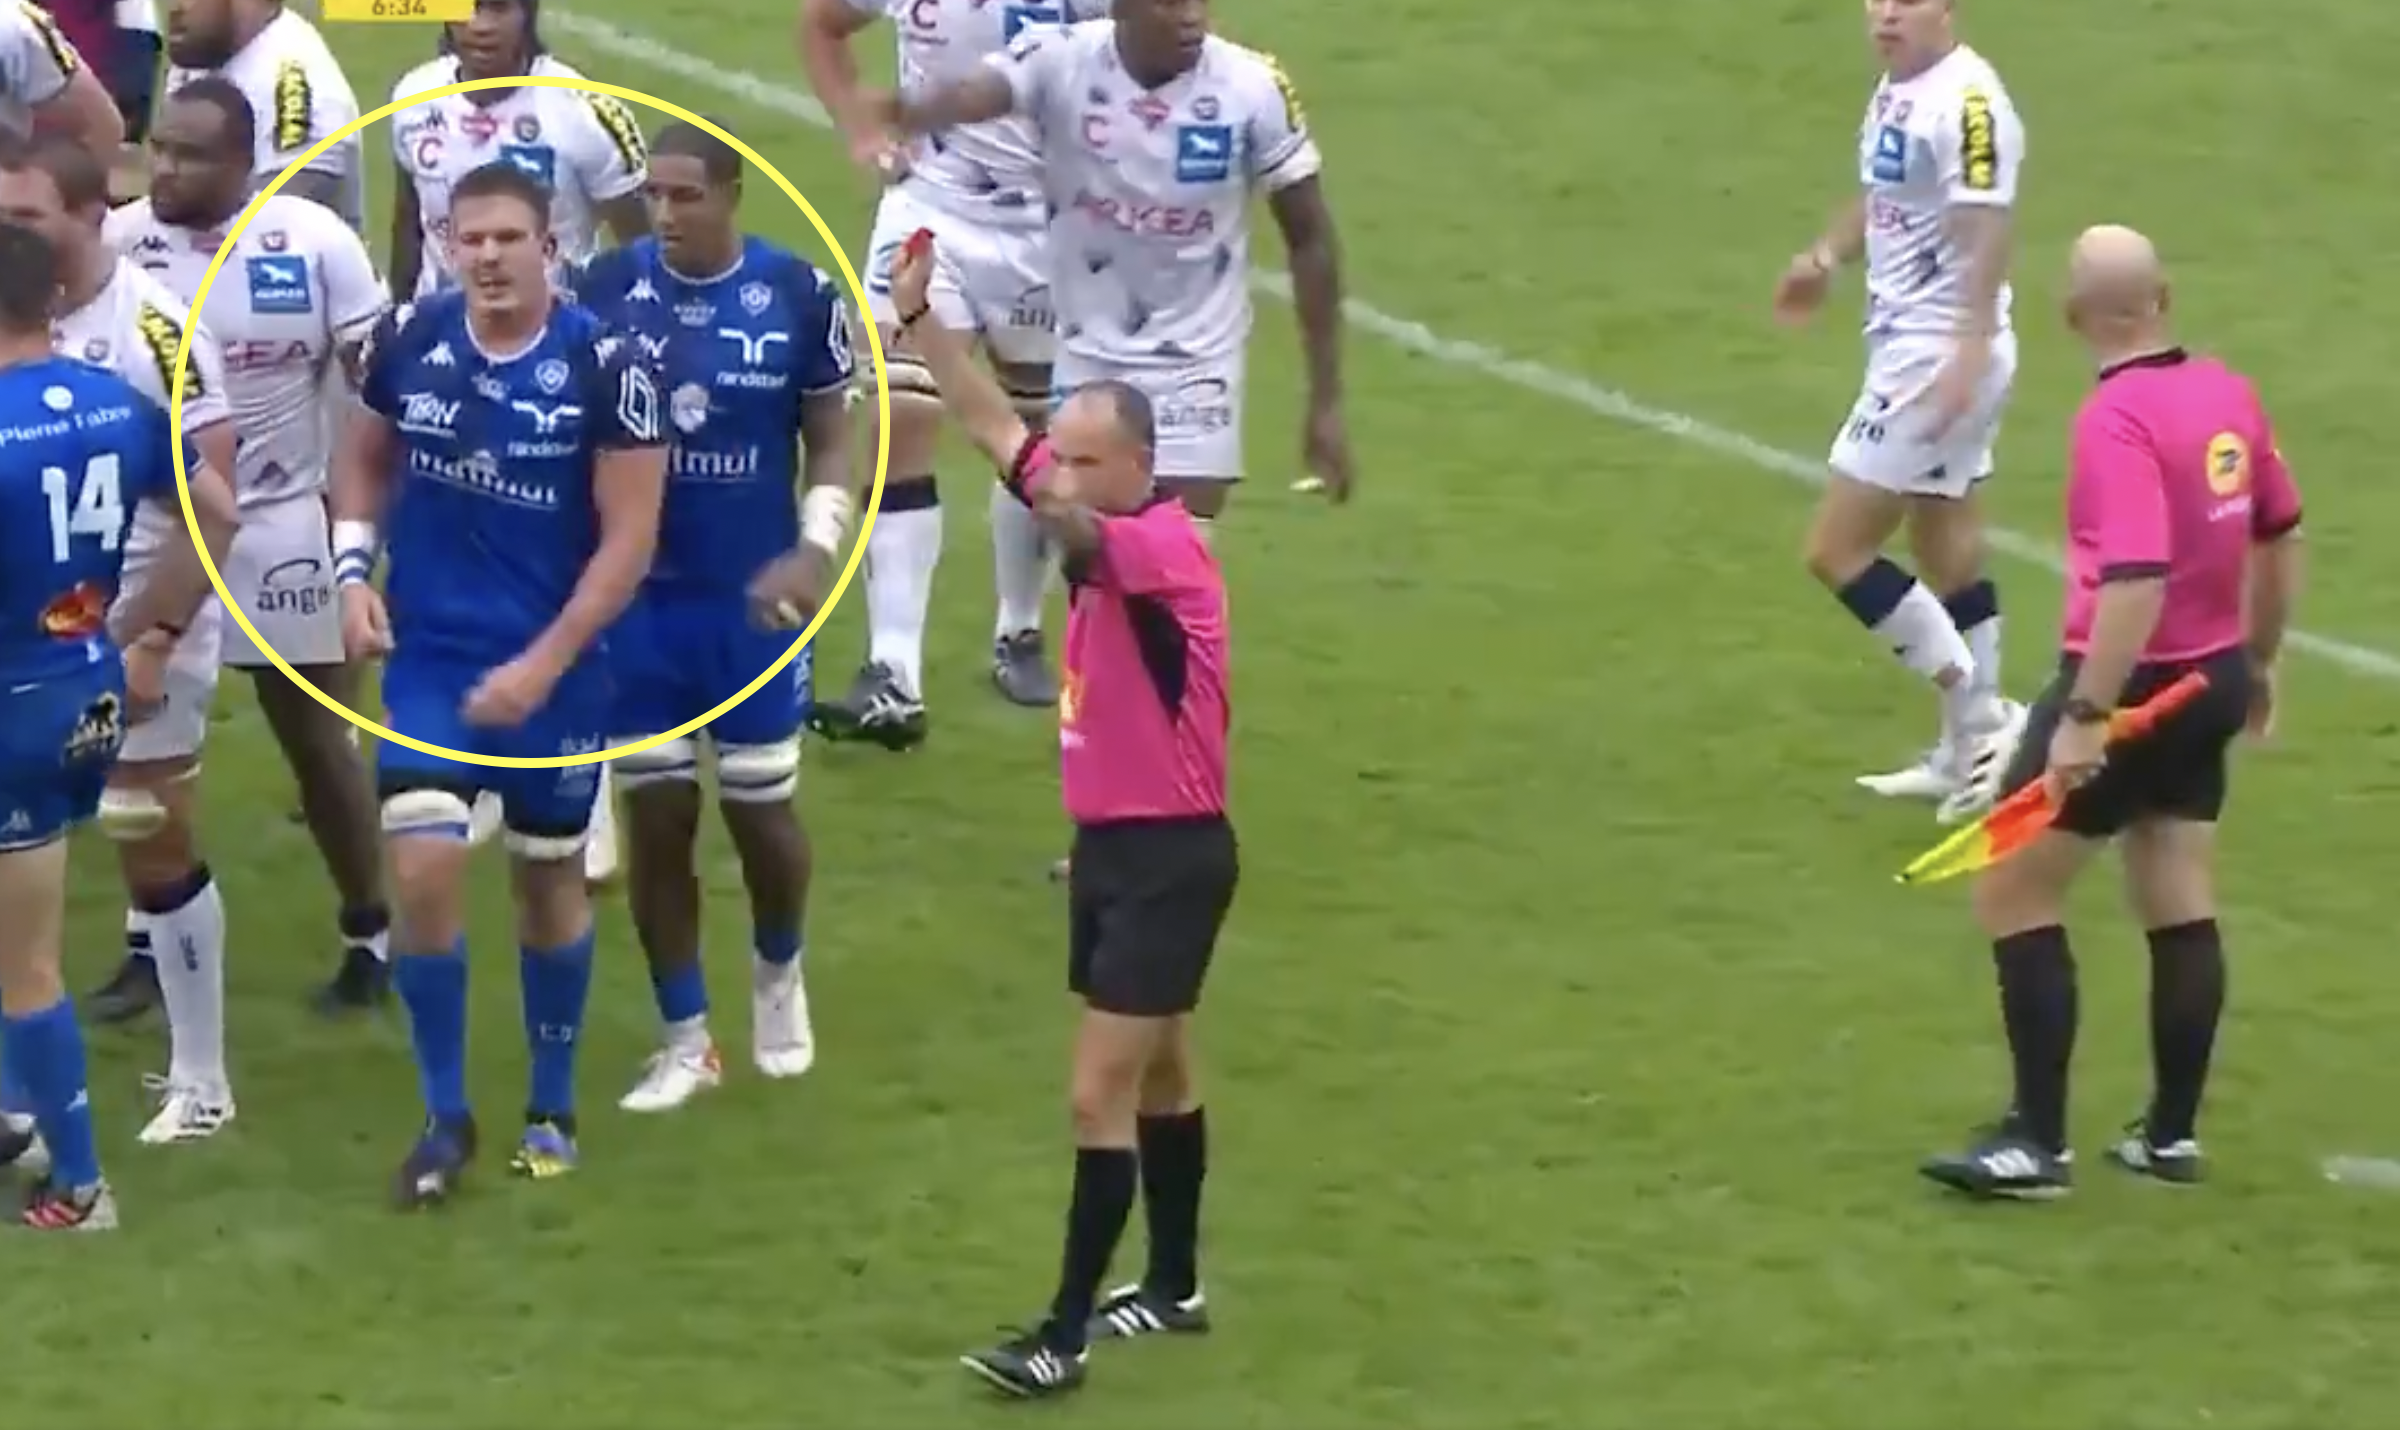 'As obvious a red card you will see': The viral tackle that has sickened the rugby world